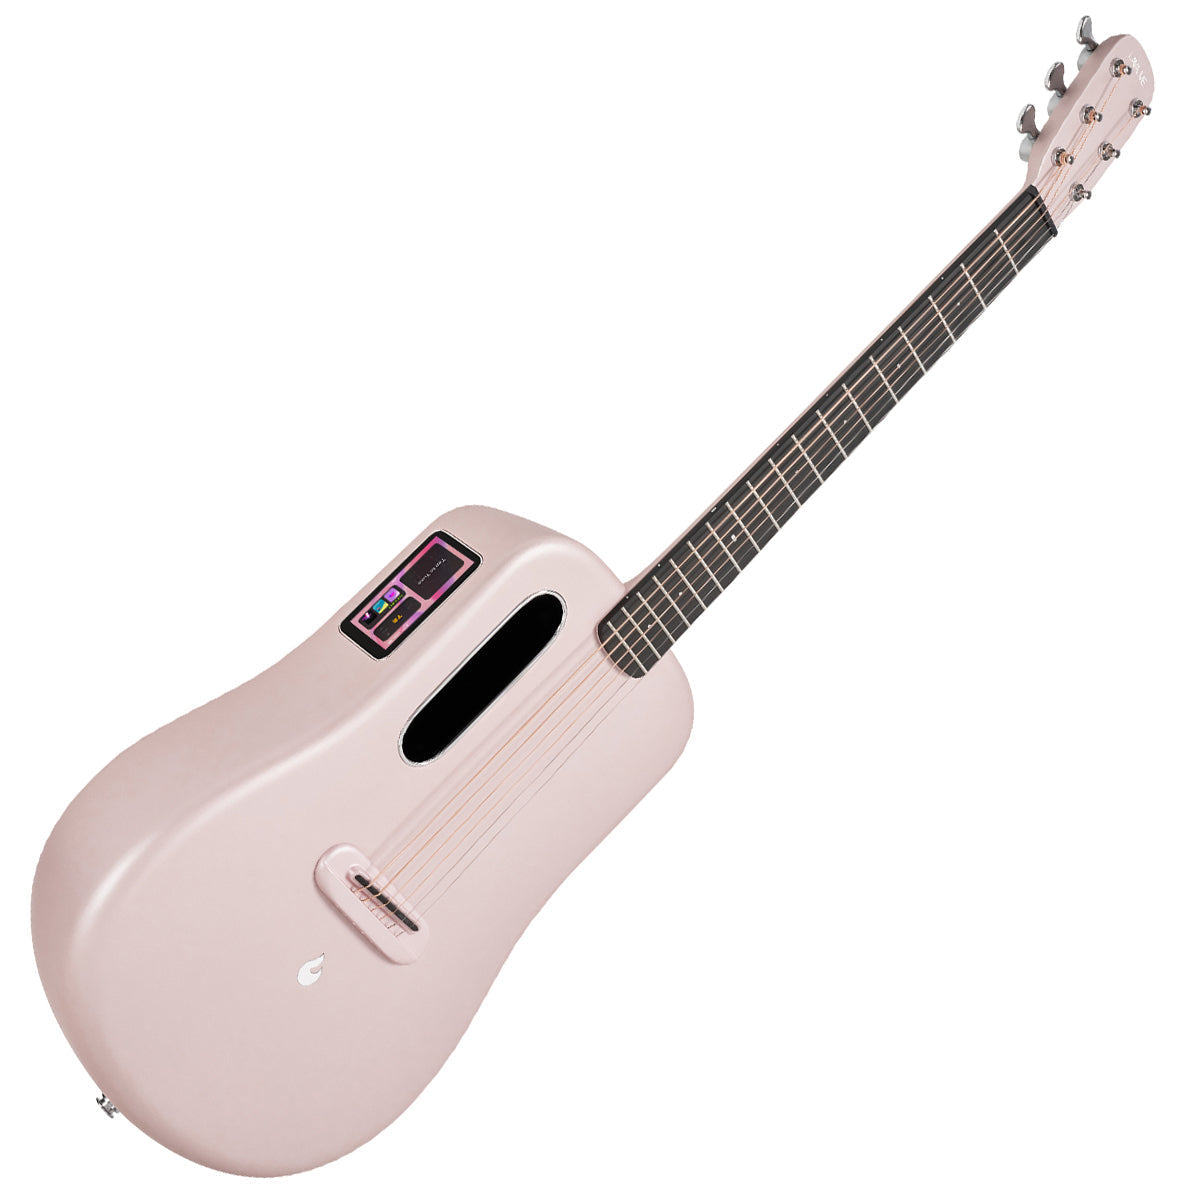 LAVA ME 3 36" with Space Bag ~ Pink, Acoustic Guitar for sale at Richards Guitars.